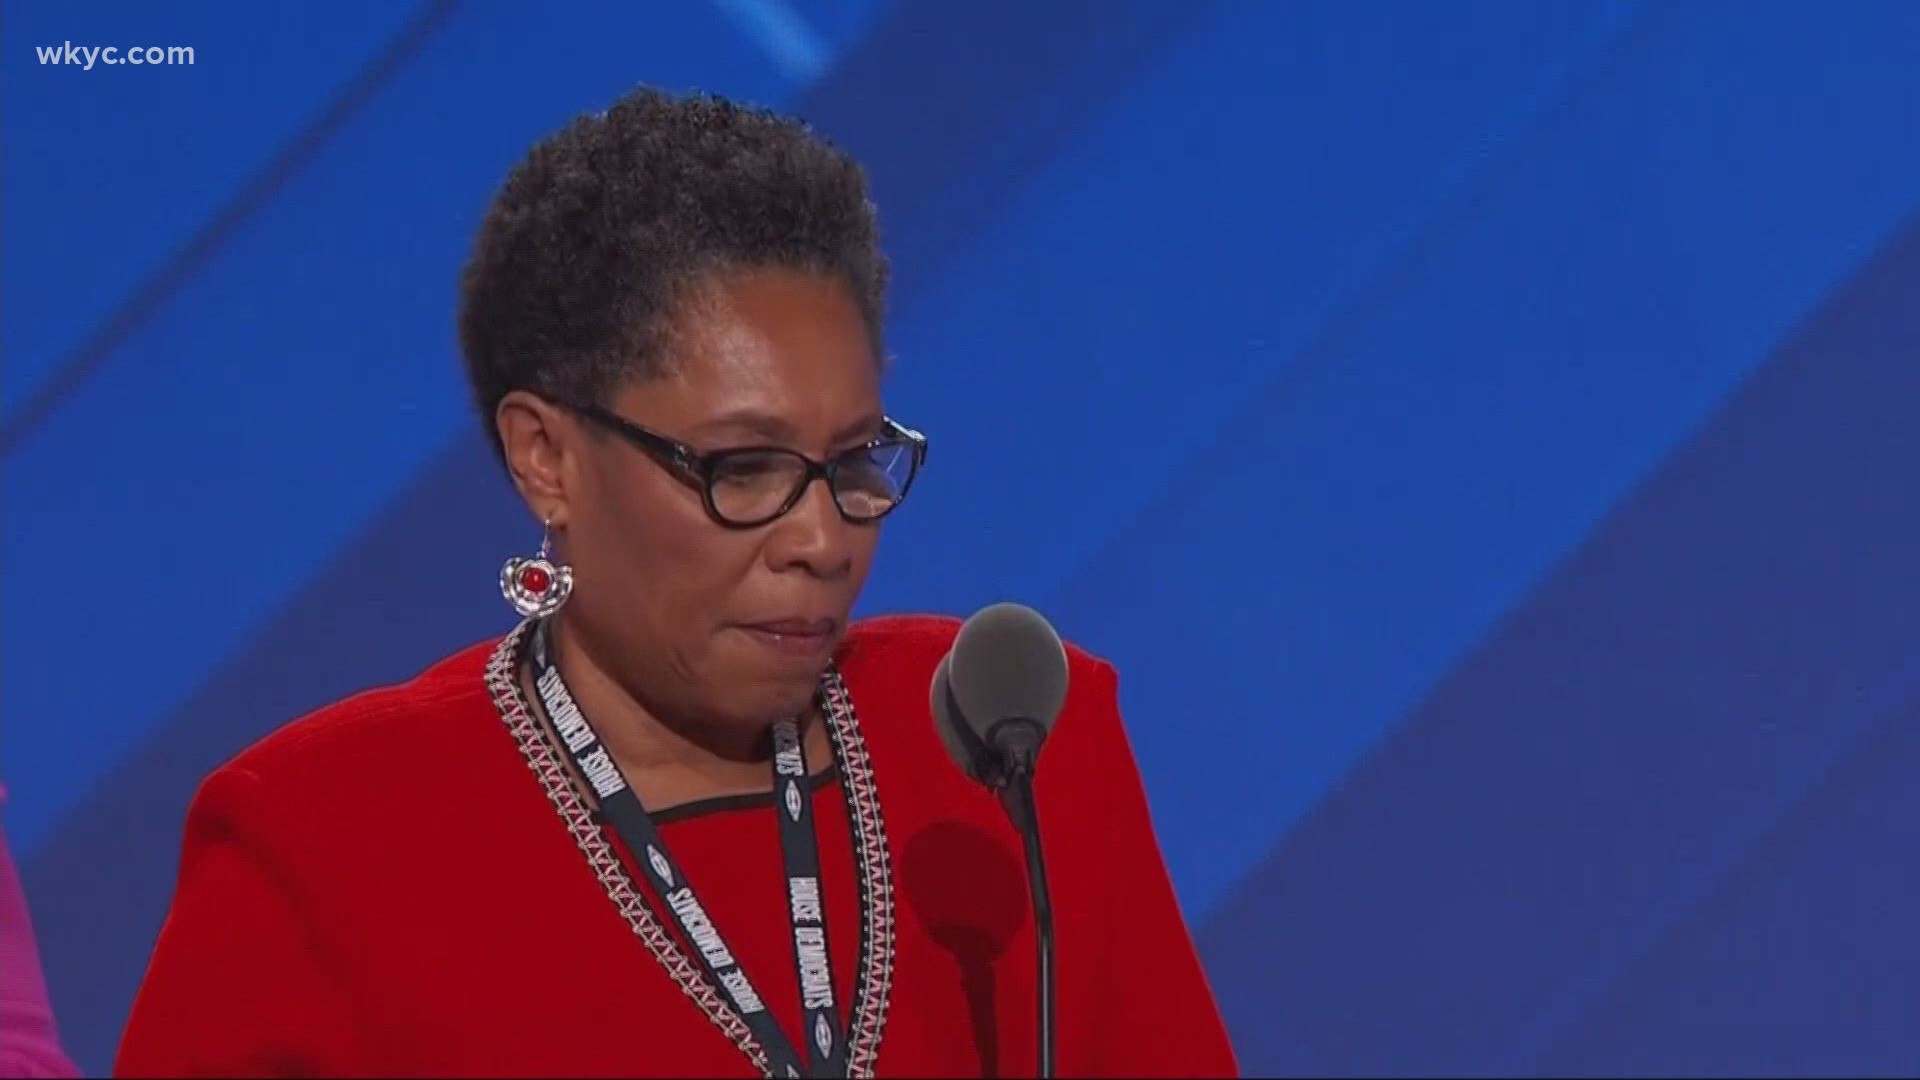 According to reports, President-elect Joe Biden has selected Rep. Marcia Fudge to lead the Department of Housing and Urban Development. This is developing.